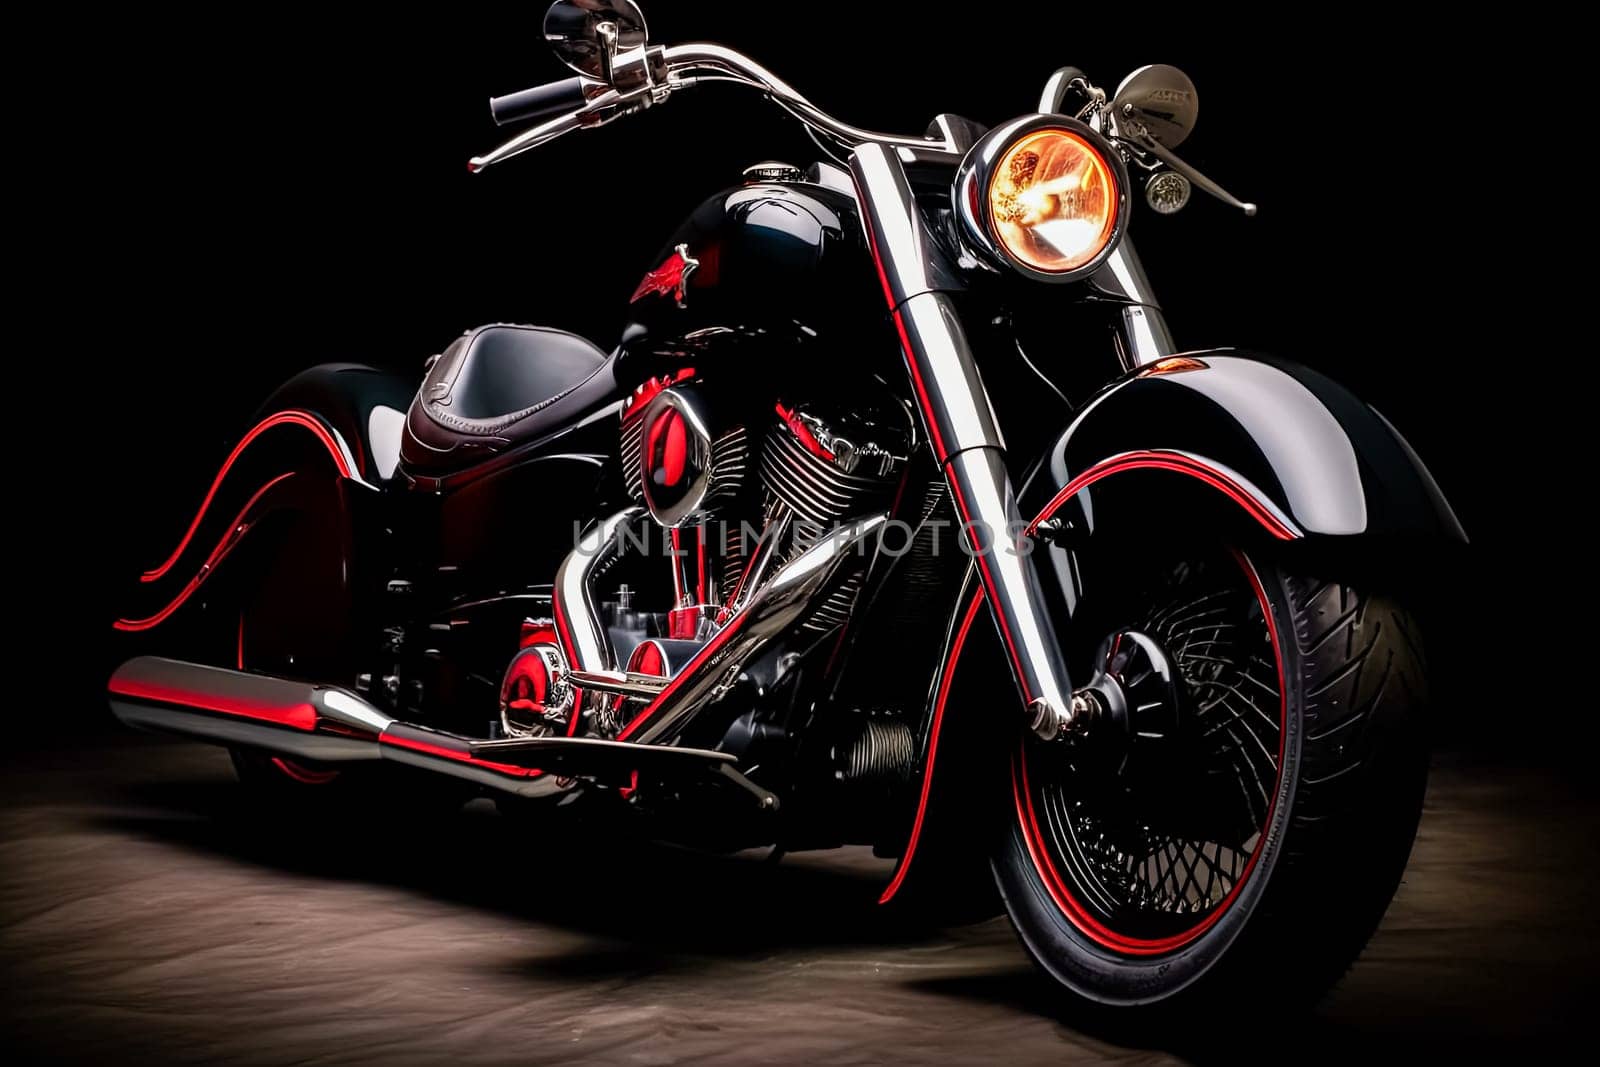 A black motorcycle with red accents is parked in front of a dark background by Alla_Morozova93